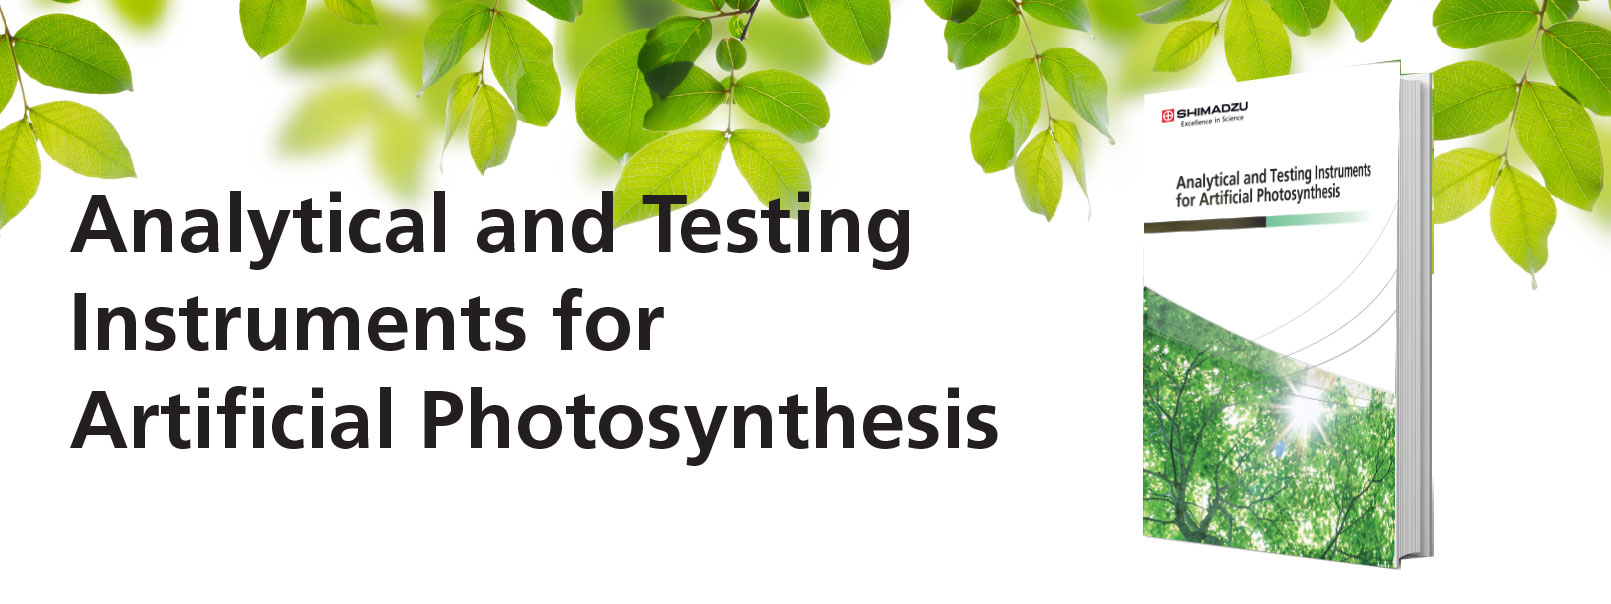 Analytical and Testing Instruments for Artificial Photosynthesis